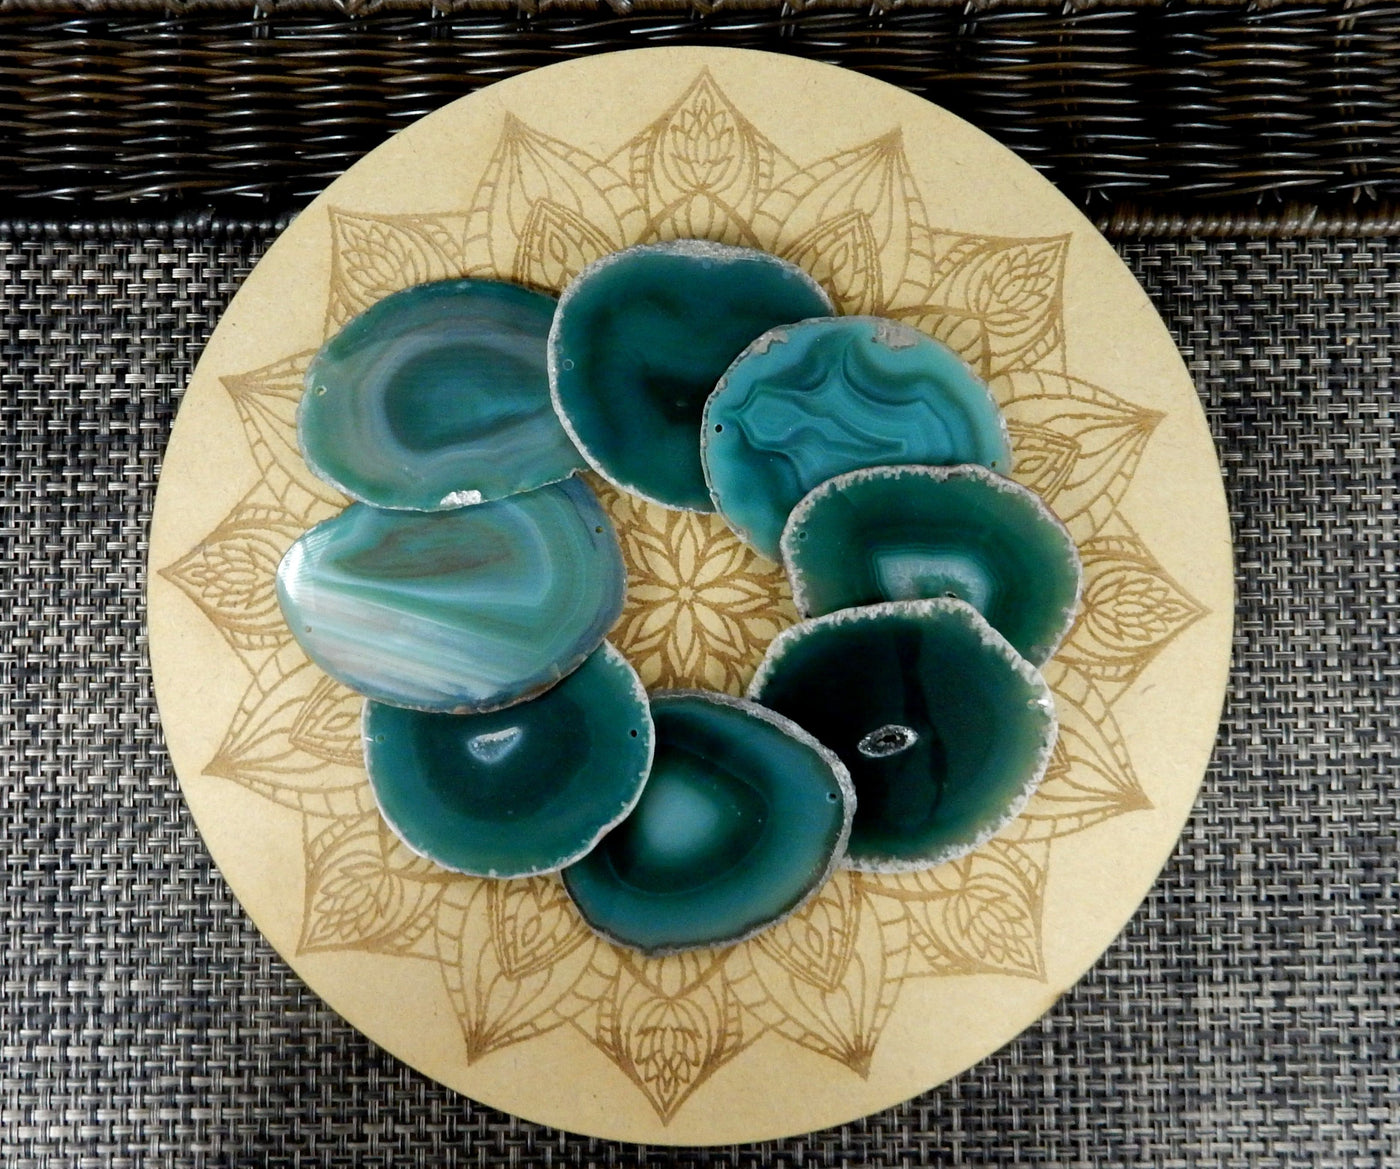 green agate slices being displayed on a wooden grid.